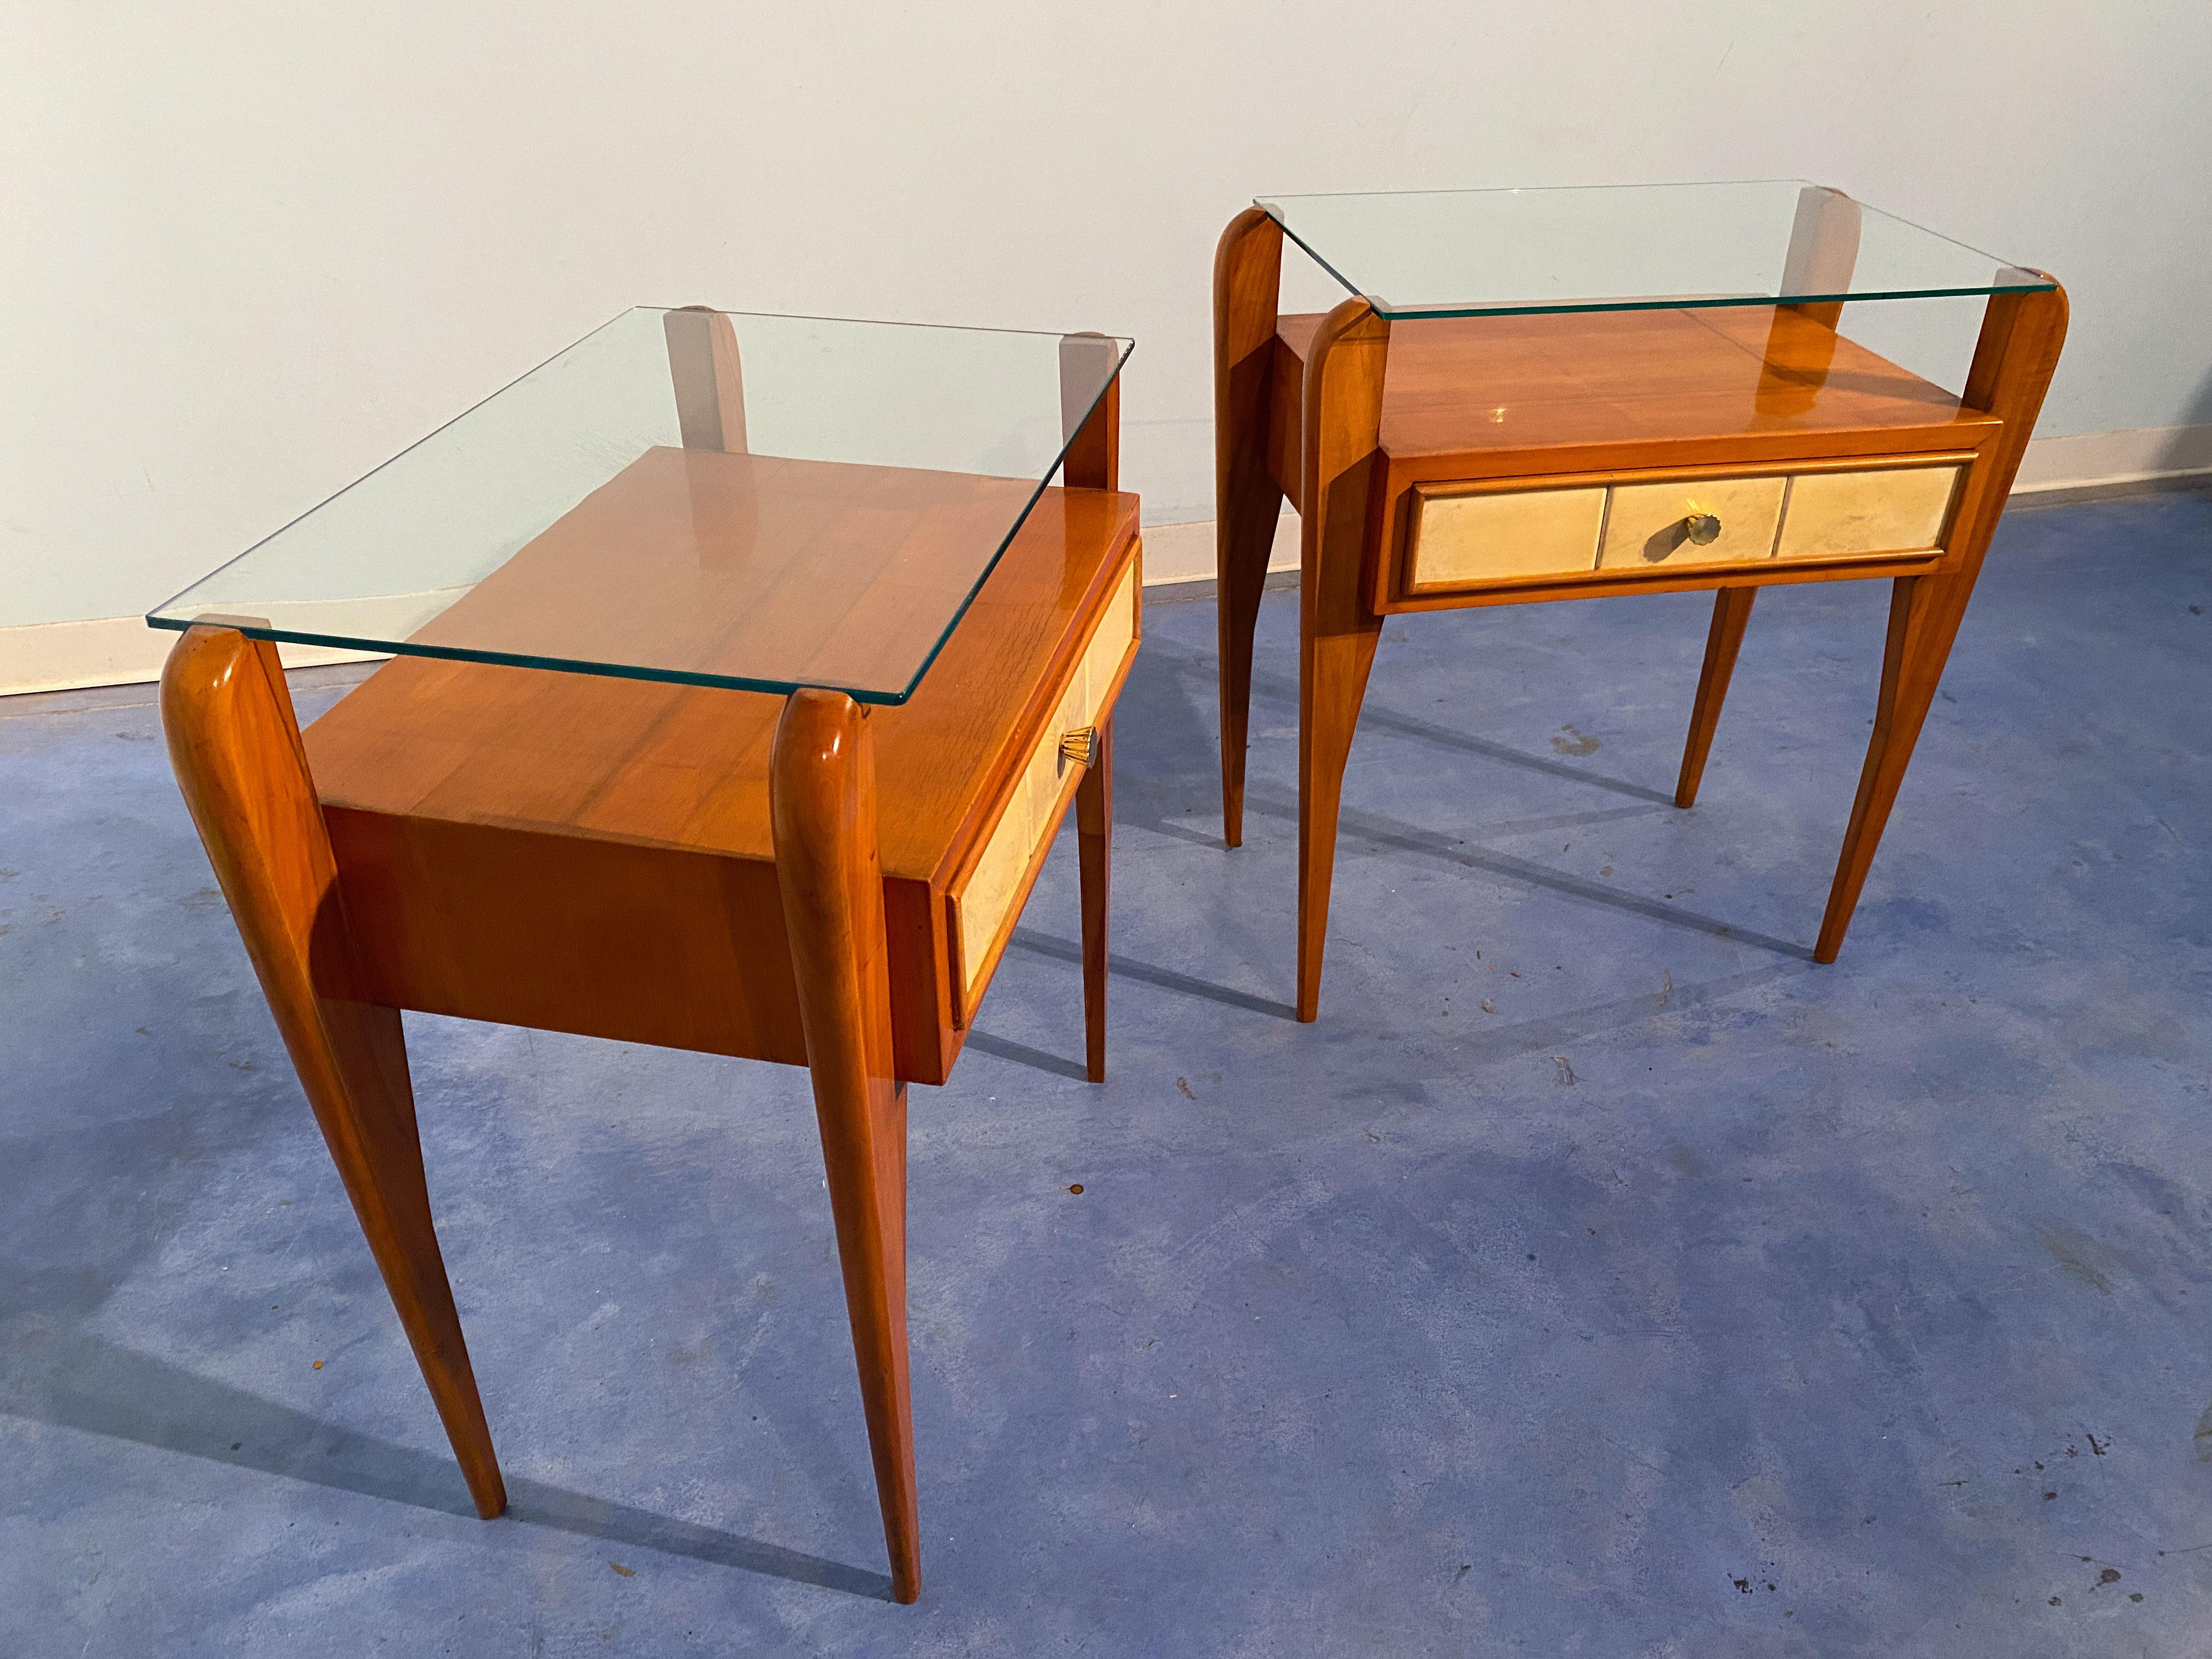 Italian Mid-Century Parchment Bedside or Nightstands by Osvaldo Borsani, 1950 For Sale 12